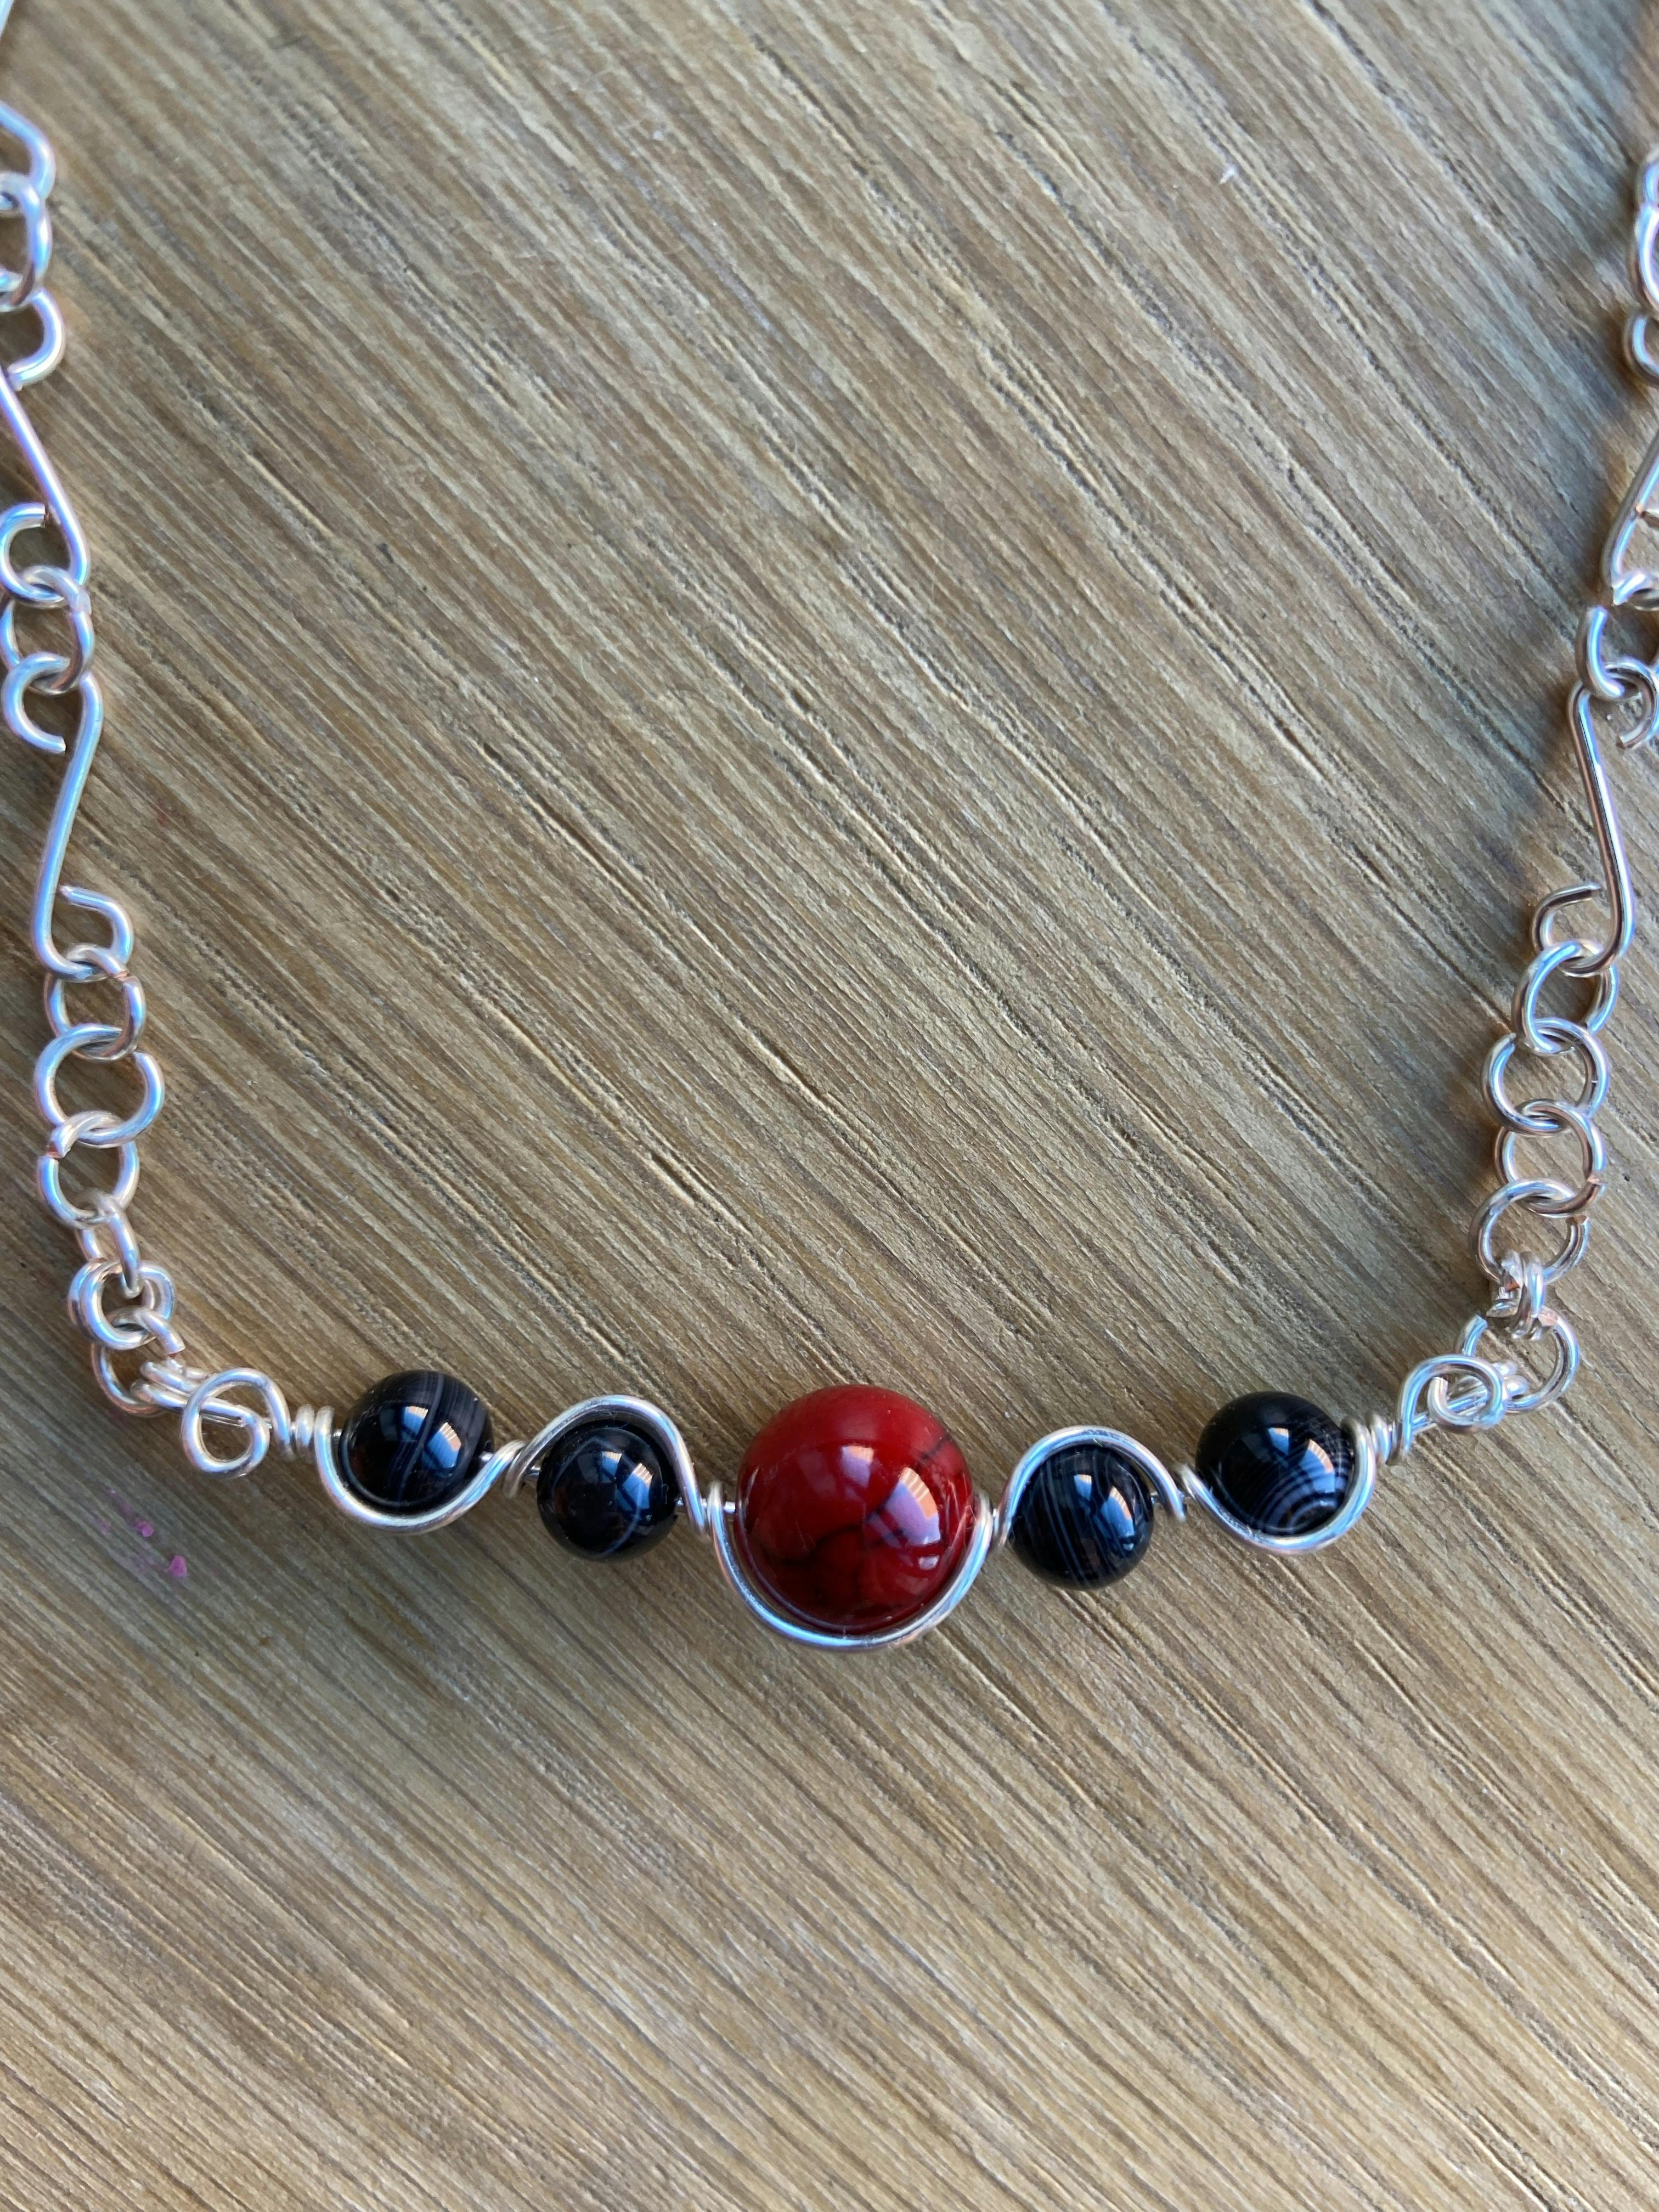 Black & red necklace